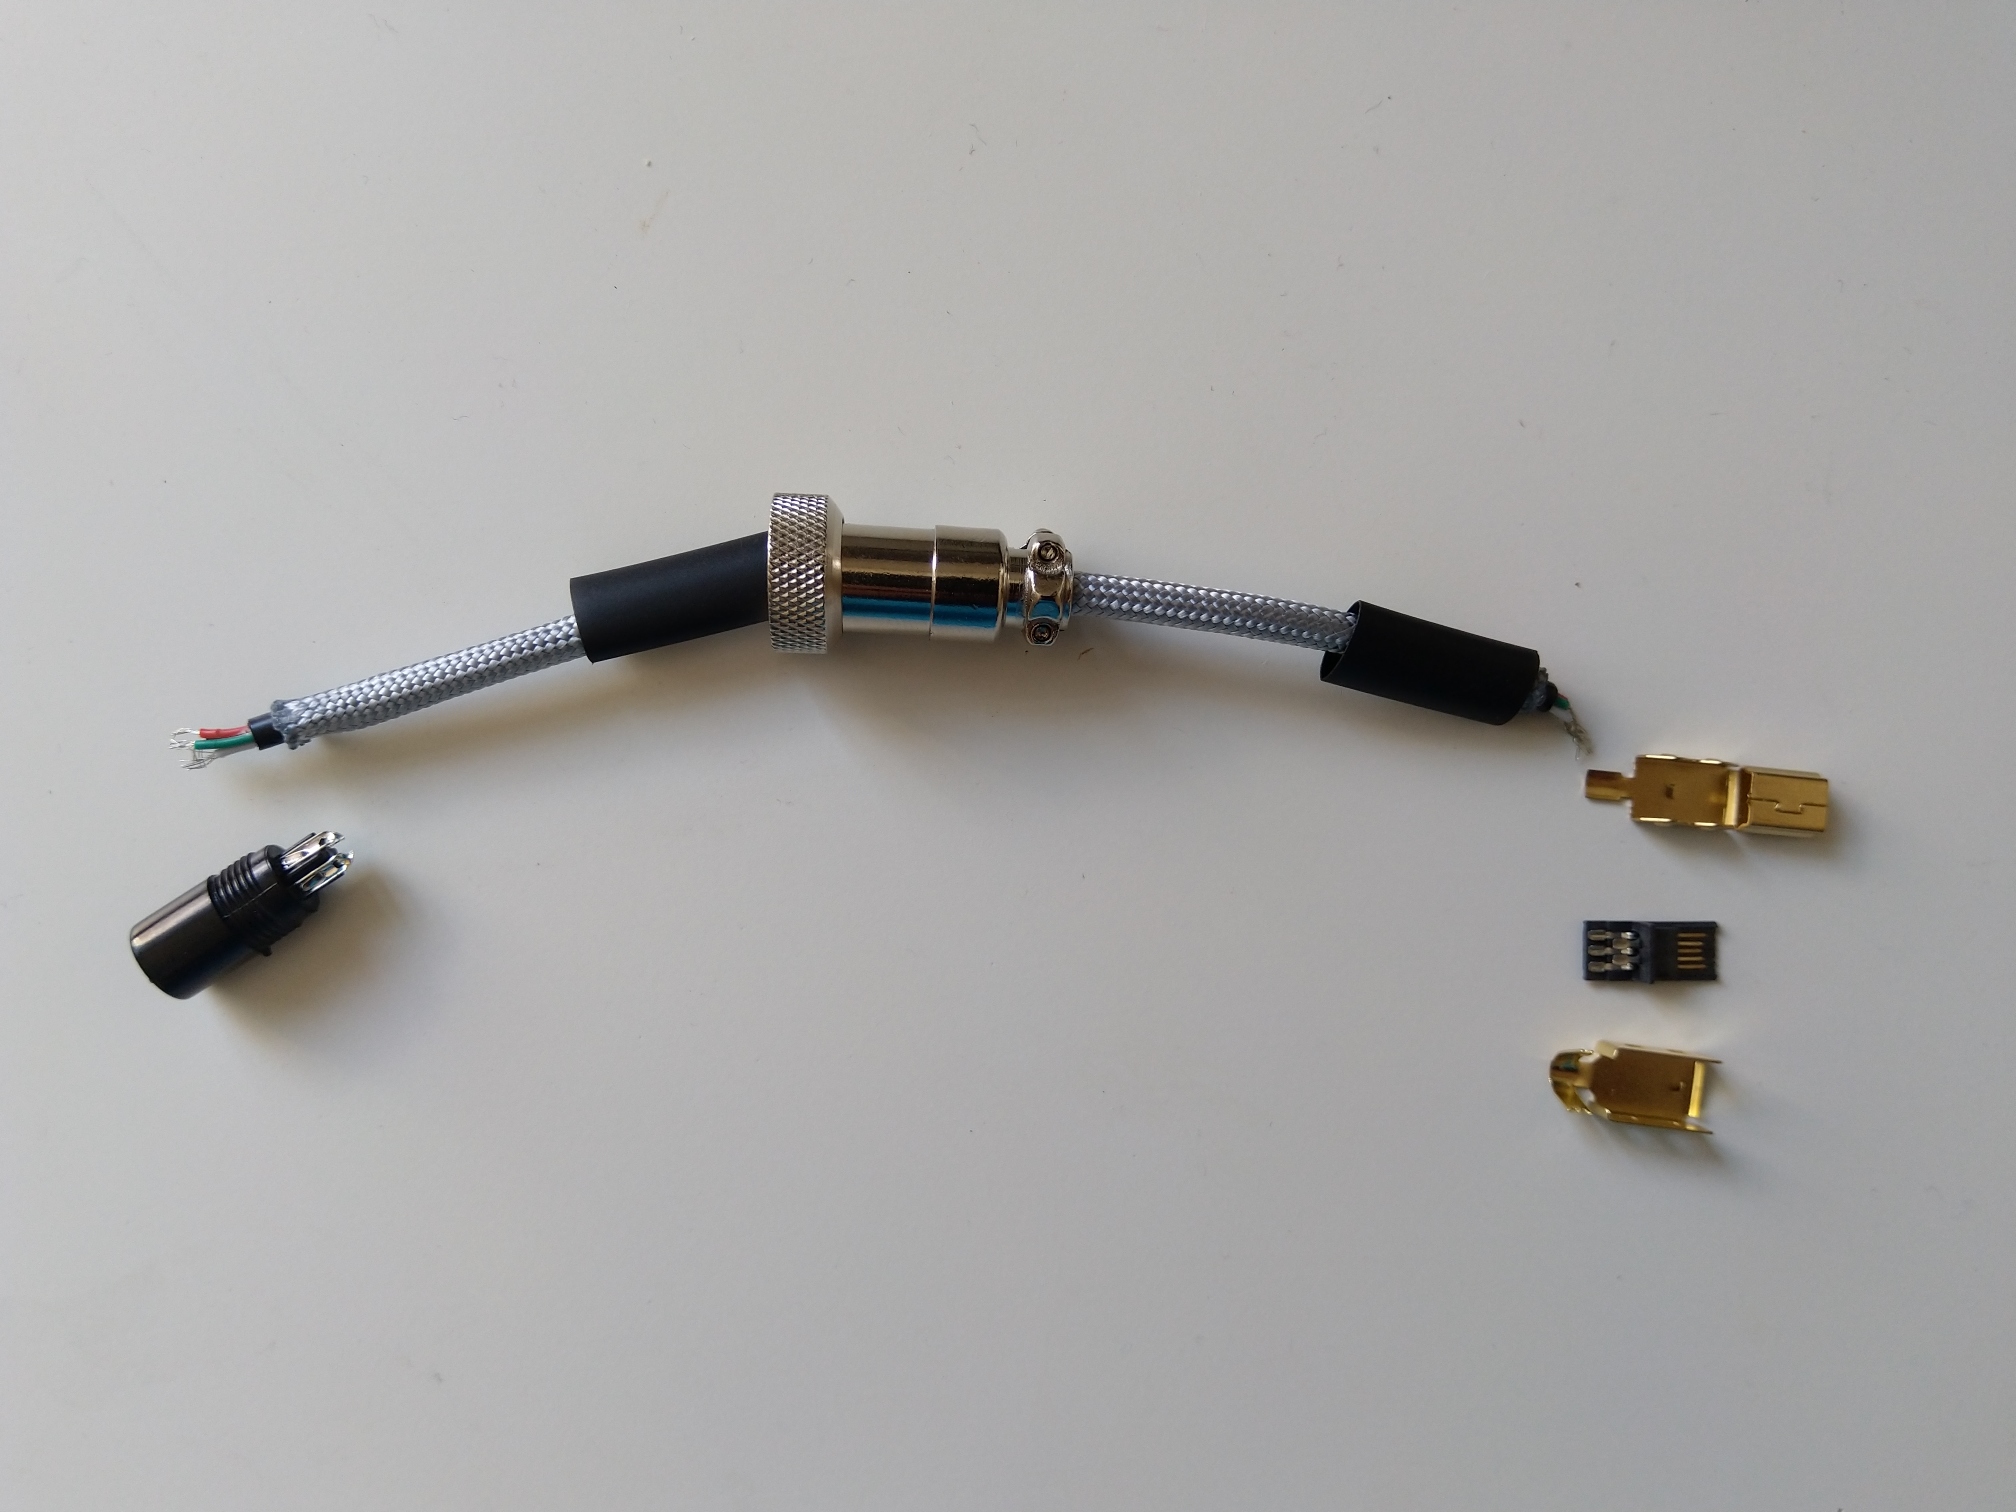 A shorter piece of cable (between the USB-mini and the aviation connector) already sleeved together with pieces of connectors and heat-shrinks. Sleeving is easy, just push the cable through the paracord. I have fixed it at ends with a drop of super glue.